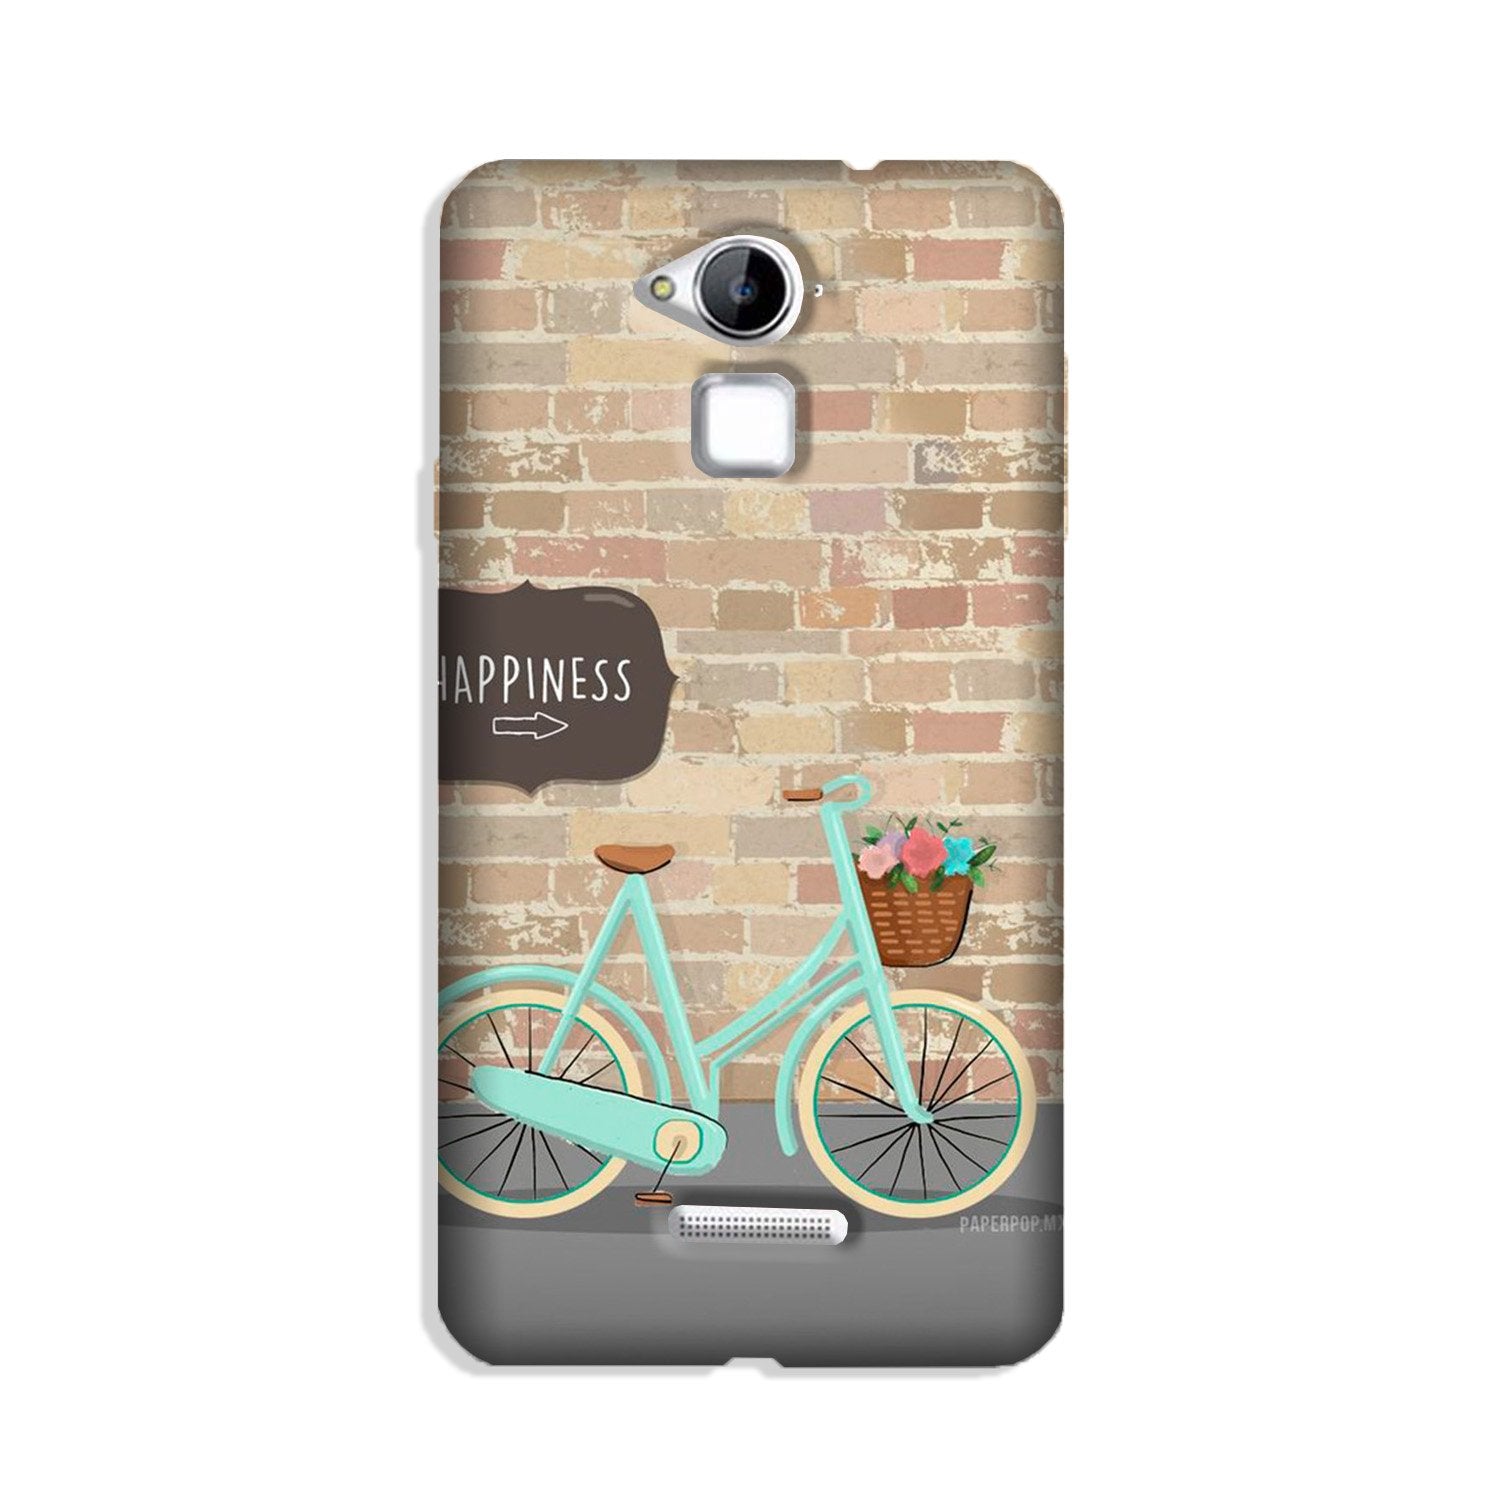 Happiness Case for Coolpad Note 3